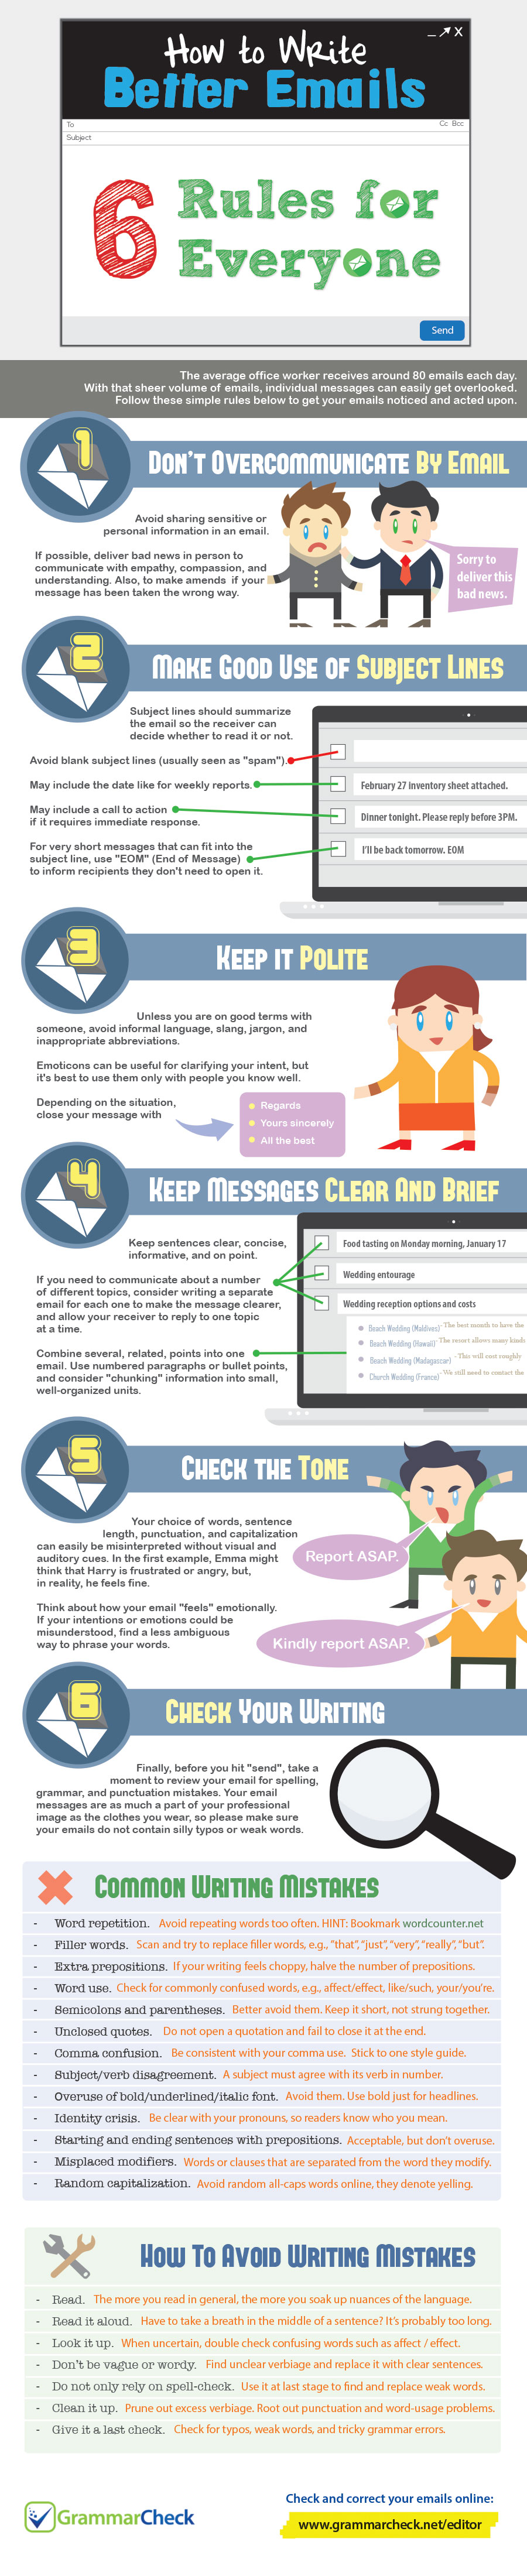 How to Write Better Emails: 6 Rules for Everyone (Infographic)